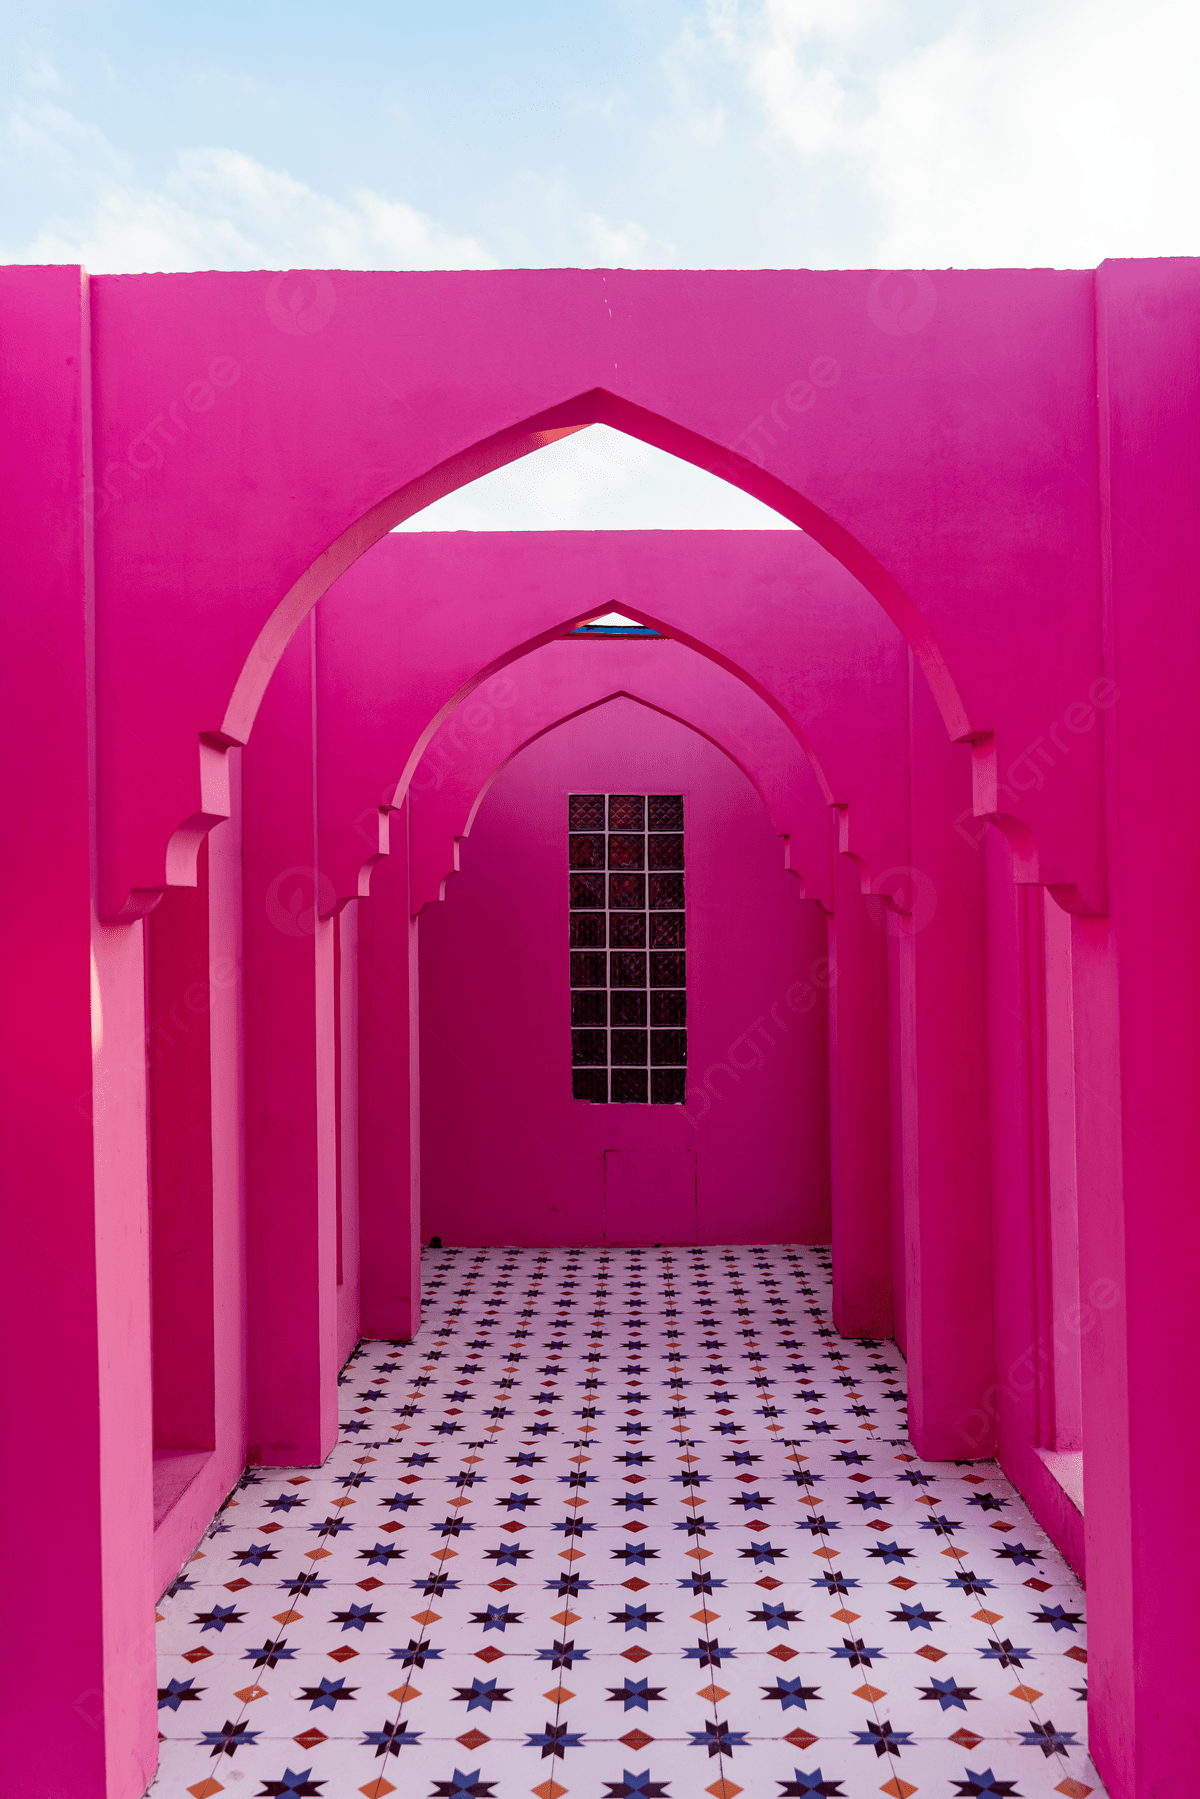 A pink hallway with a window and a patterned floor. - Magenta